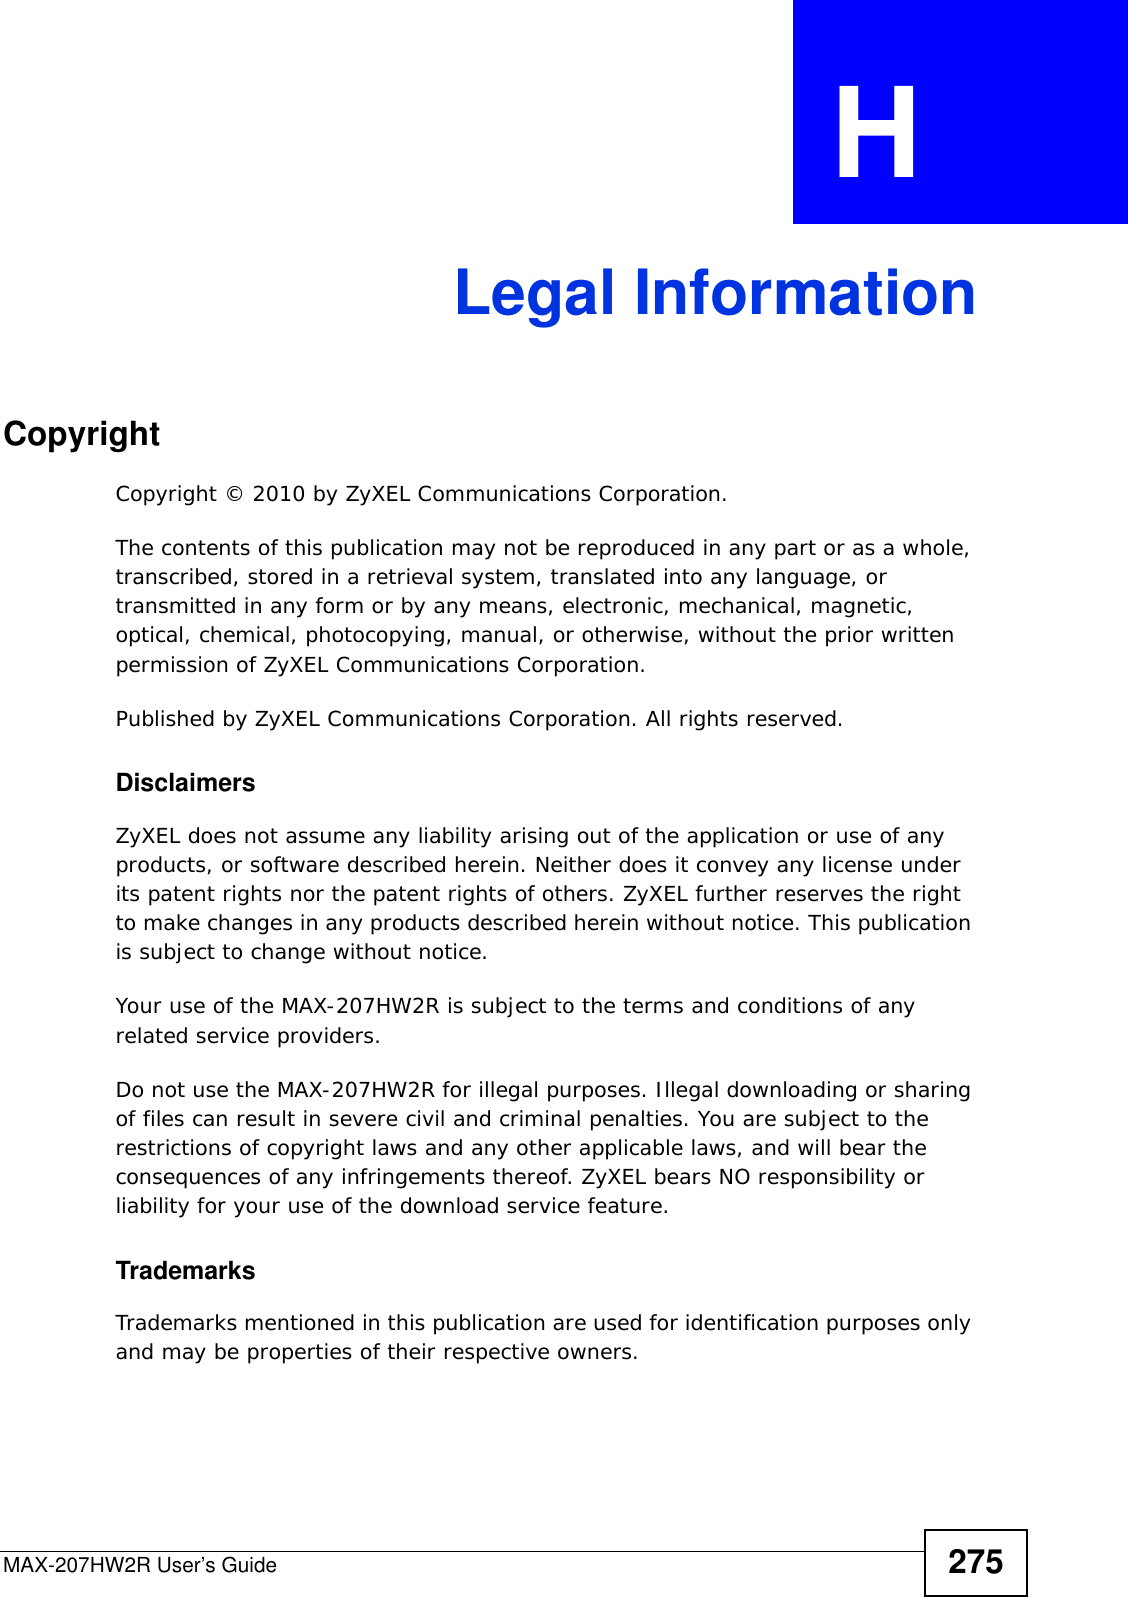 MAX-207HW2R User’s Guide 275APPENDIX  H Legal InformationCopyrightCopyright © 2010 by ZyXEL Communications Corporation.The contents of this publication may not be reproduced in any part or as a whole, transcribed, stored in a retrieval system, translated into any language, or transmitted in any form or by any means, electronic, mechanical, magnetic, optical, chemical, photocopying, manual, or otherwise, without the prior written permission of ZyXEL Communications Corporation.Published by ZyXEL Communications Corporation. All rights reserved.DisclaimersZyXEL does not assume any liability arising out of the application or use of any products, or software described herein. Neither does it convey any license under its patent rights nor the patent rights of others. ZyXEL further reserves the right to make changes in any products described herein without notice. This publication is subject to change without notice.Your use of the MAX-207HW2R is subject to the terms and conditions of any related service providers.Do not use the MAX-207HW2R for illegal purposes. Illegal downloading or sharing of files can result in severe civil and criminal penalties. You are subject to the restrictions of copyright laws and any other applicable laws, and will bear the consequences of any infringements thereof. ZyXEL bears NO responsibility or liability for your use of the download service feature.TrademarksTrademarks mentioned in this publication are used for identification purposes only and may be properties of their respective owners.